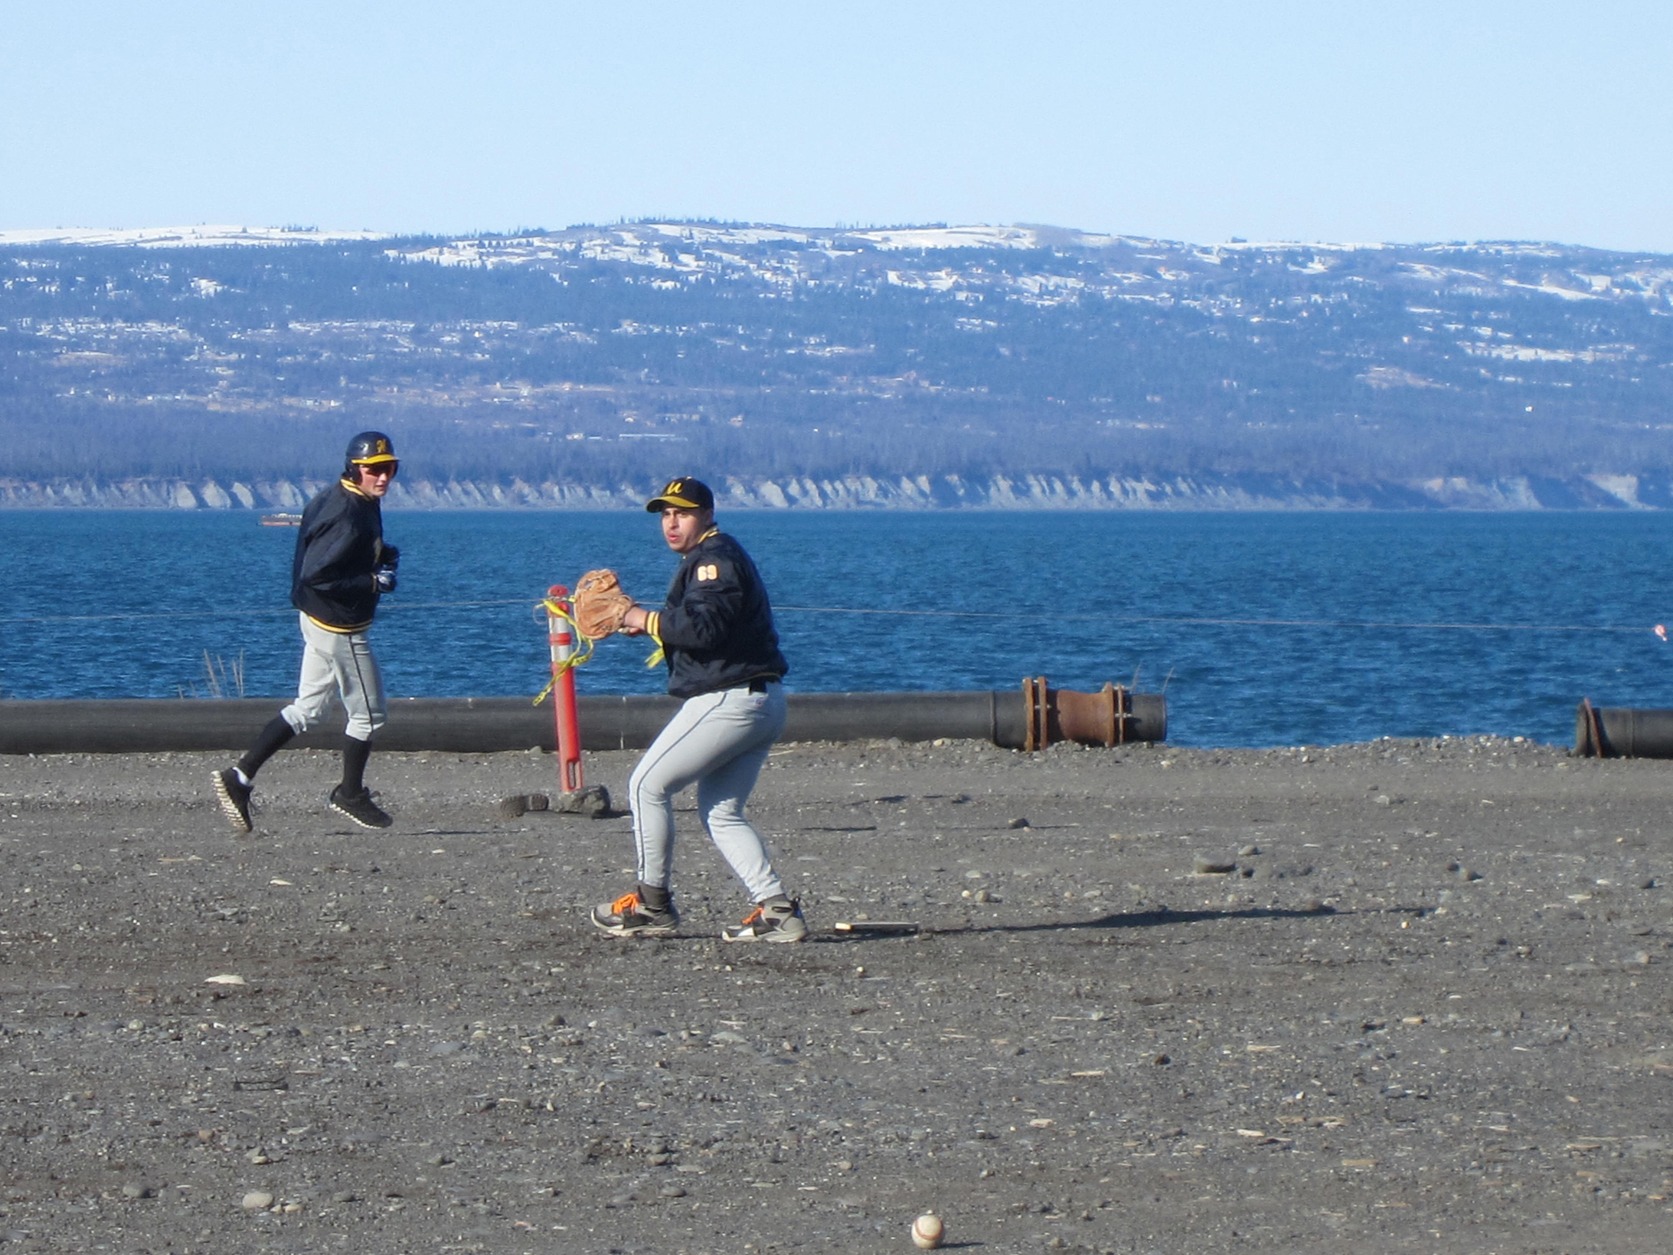 Dick Perez throws the ball during a Mariner practice on the Homer Spit, while Brian Rowe runs. The Mariners’ first game of the season will be May 3 at home.